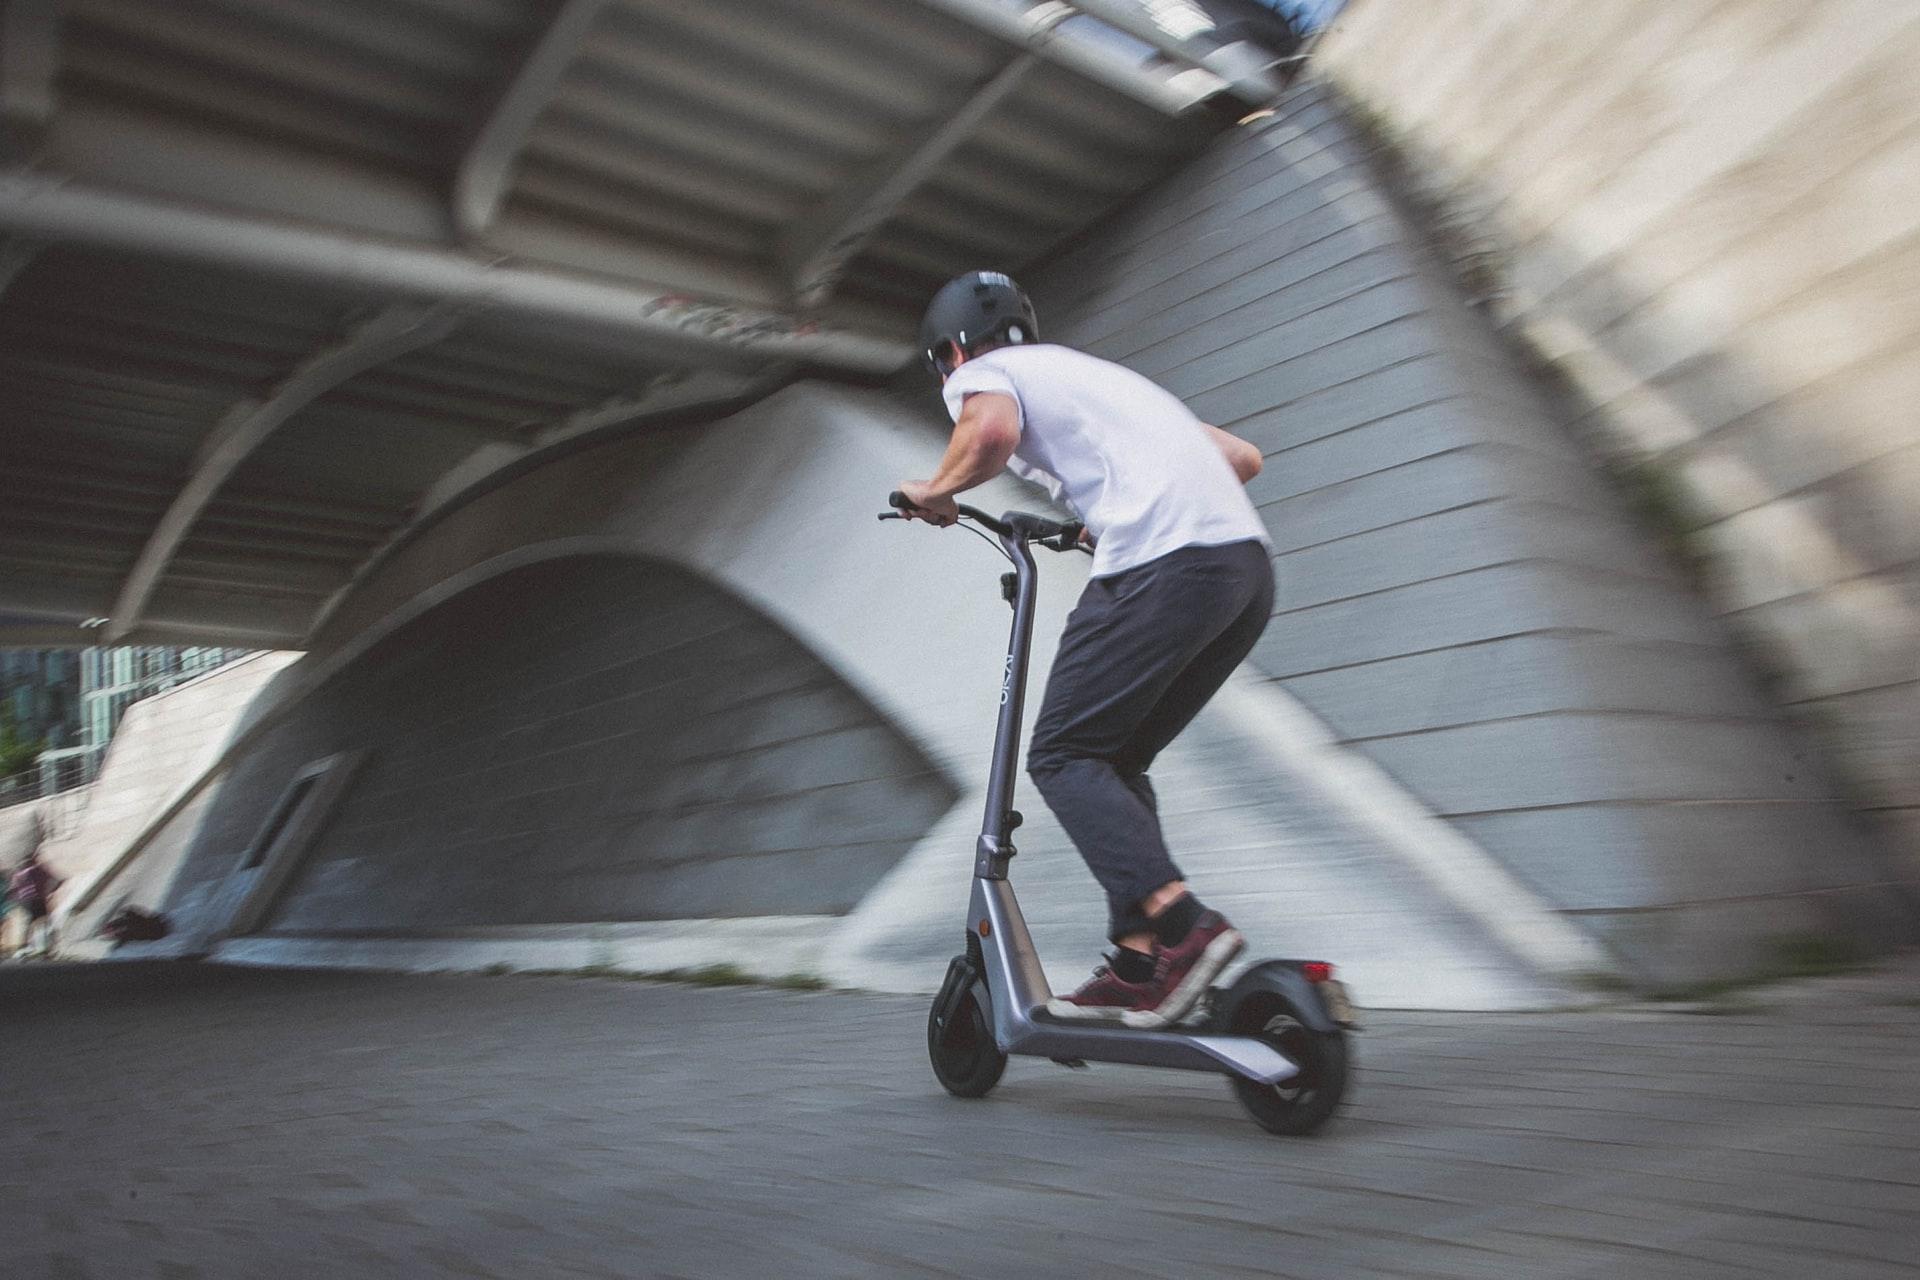 The introduction of the electric scooter has brought on a wave of injuries.